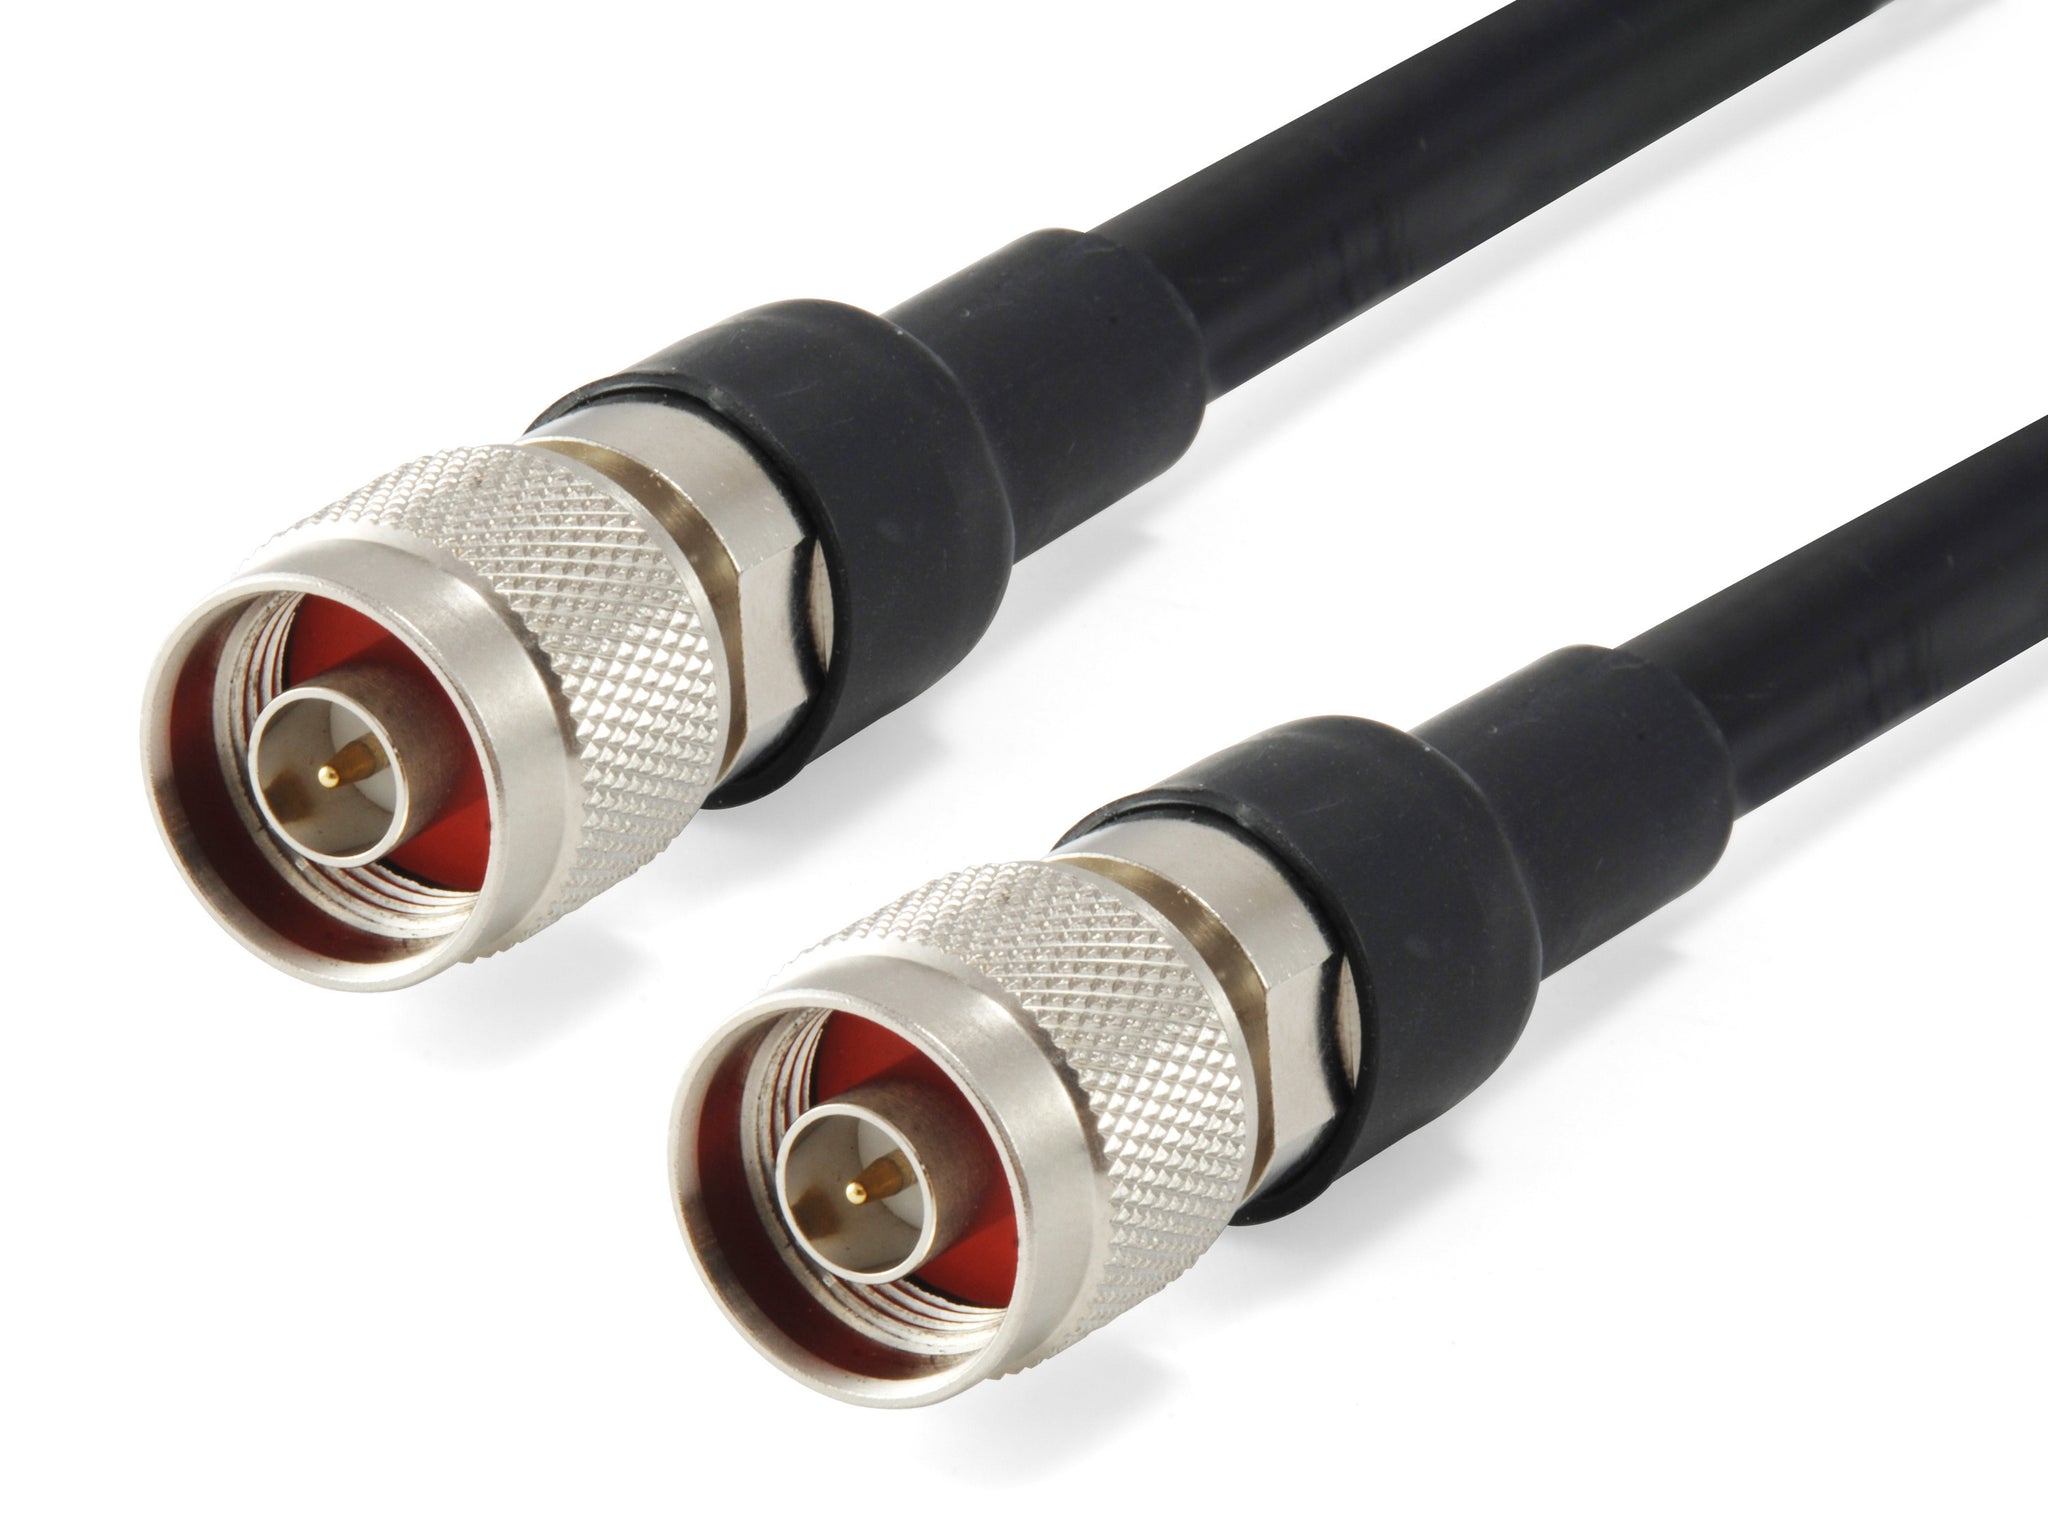 ANC-4110 1m 400 Series N Male to N Male Antenna Cable